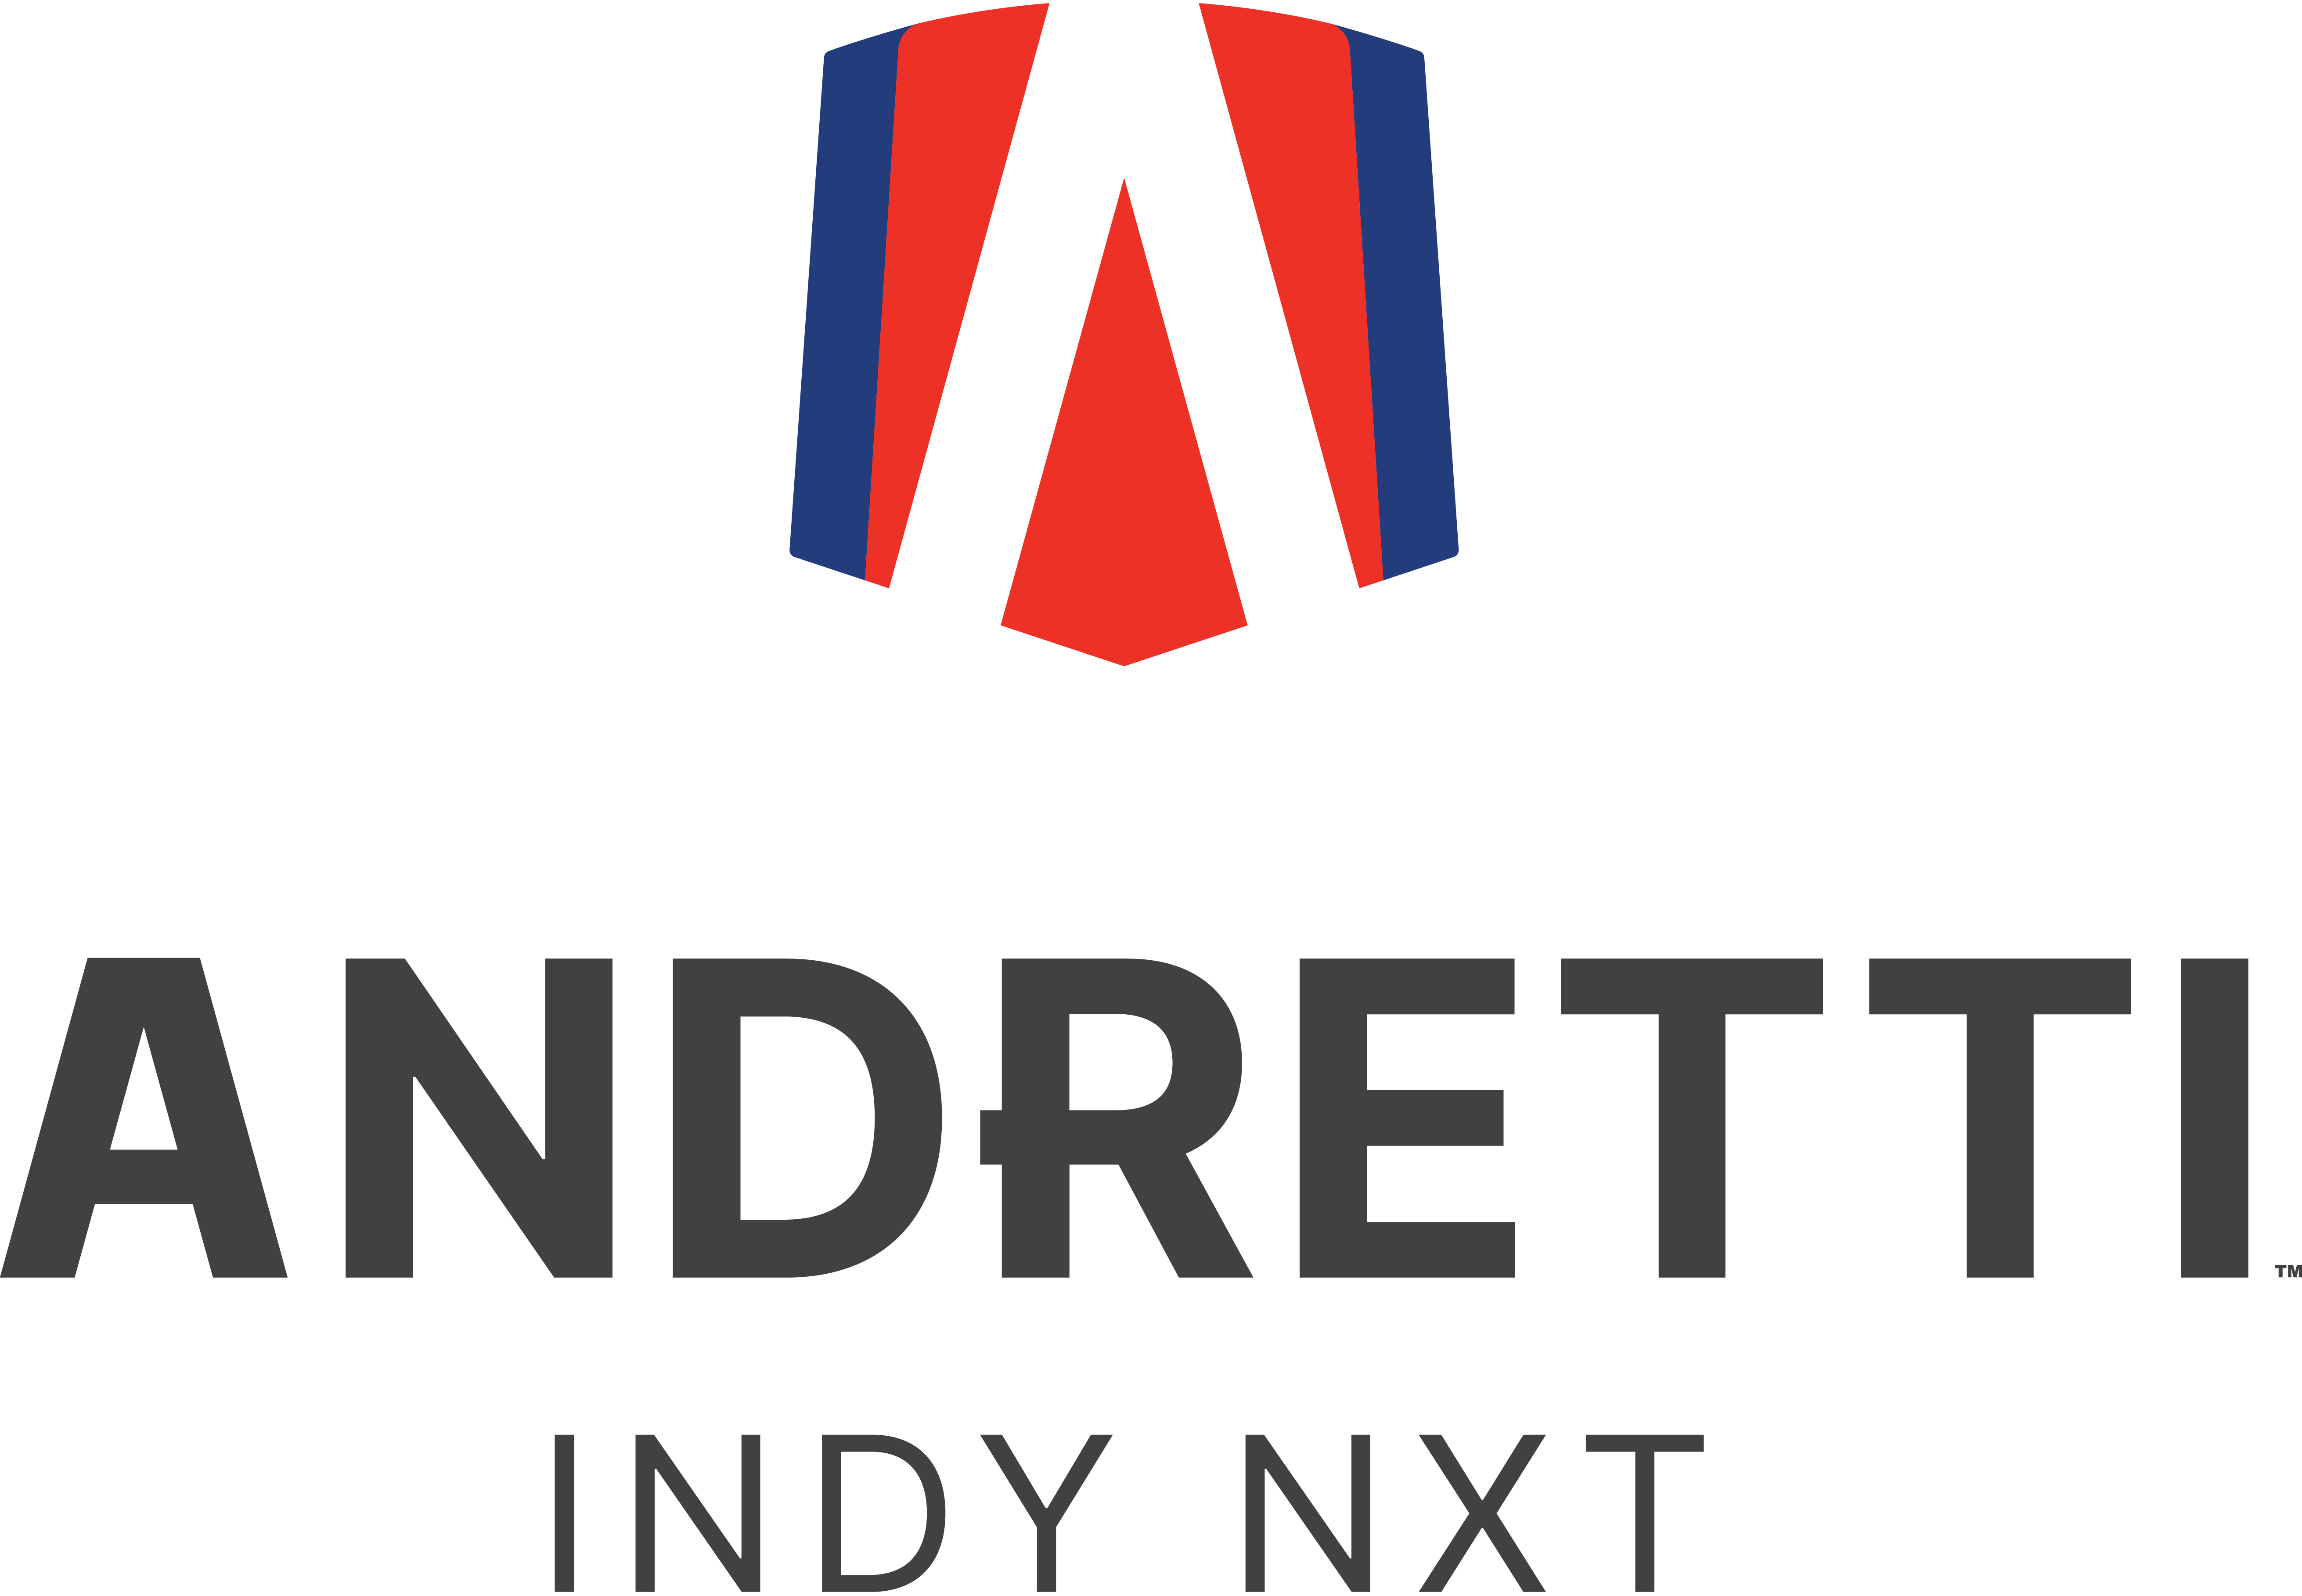 Andretti Indy NXT Team logo